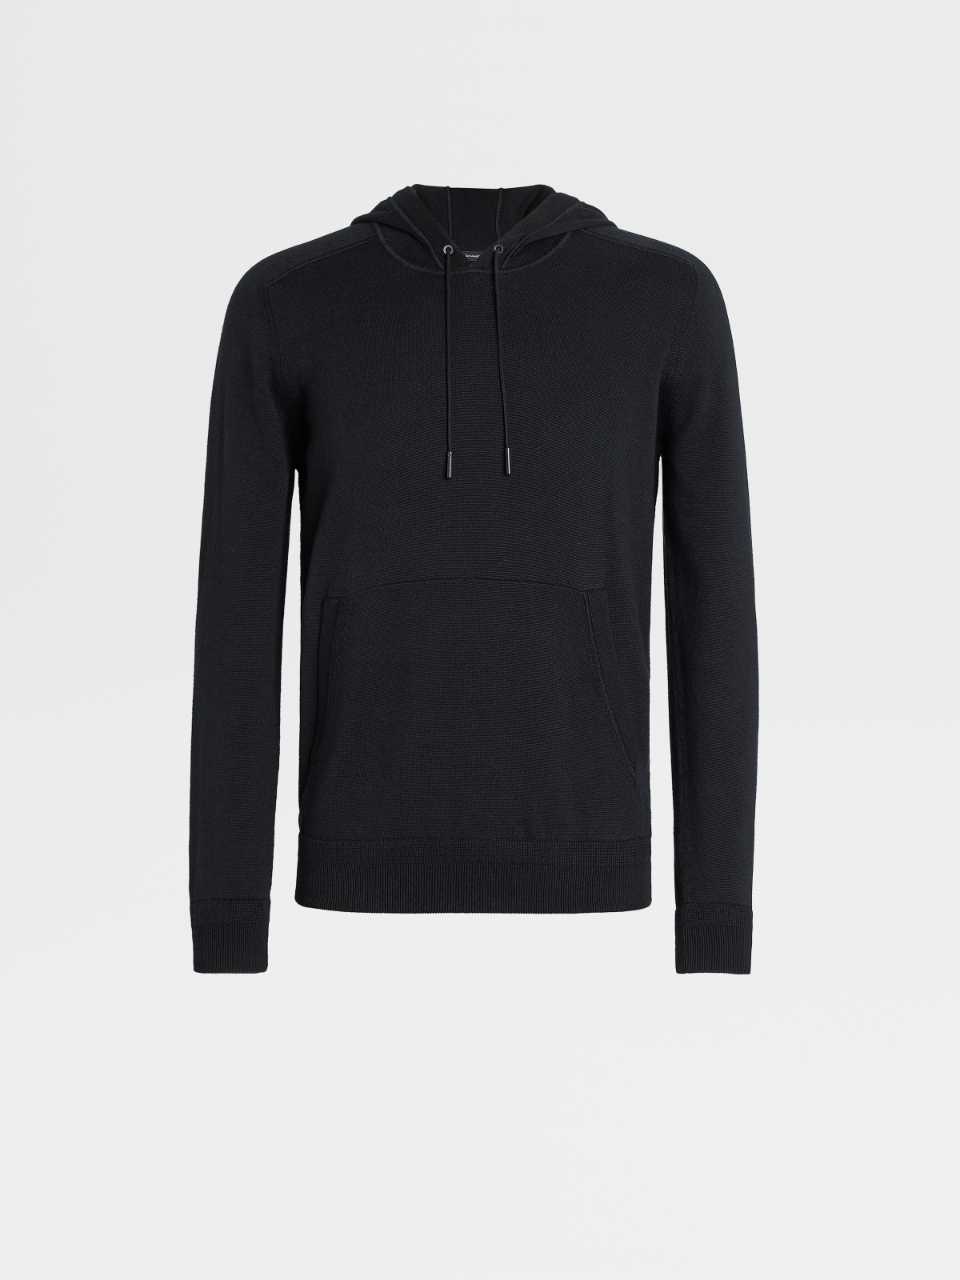 Black Cotton and Cashmere Knit Hoodie